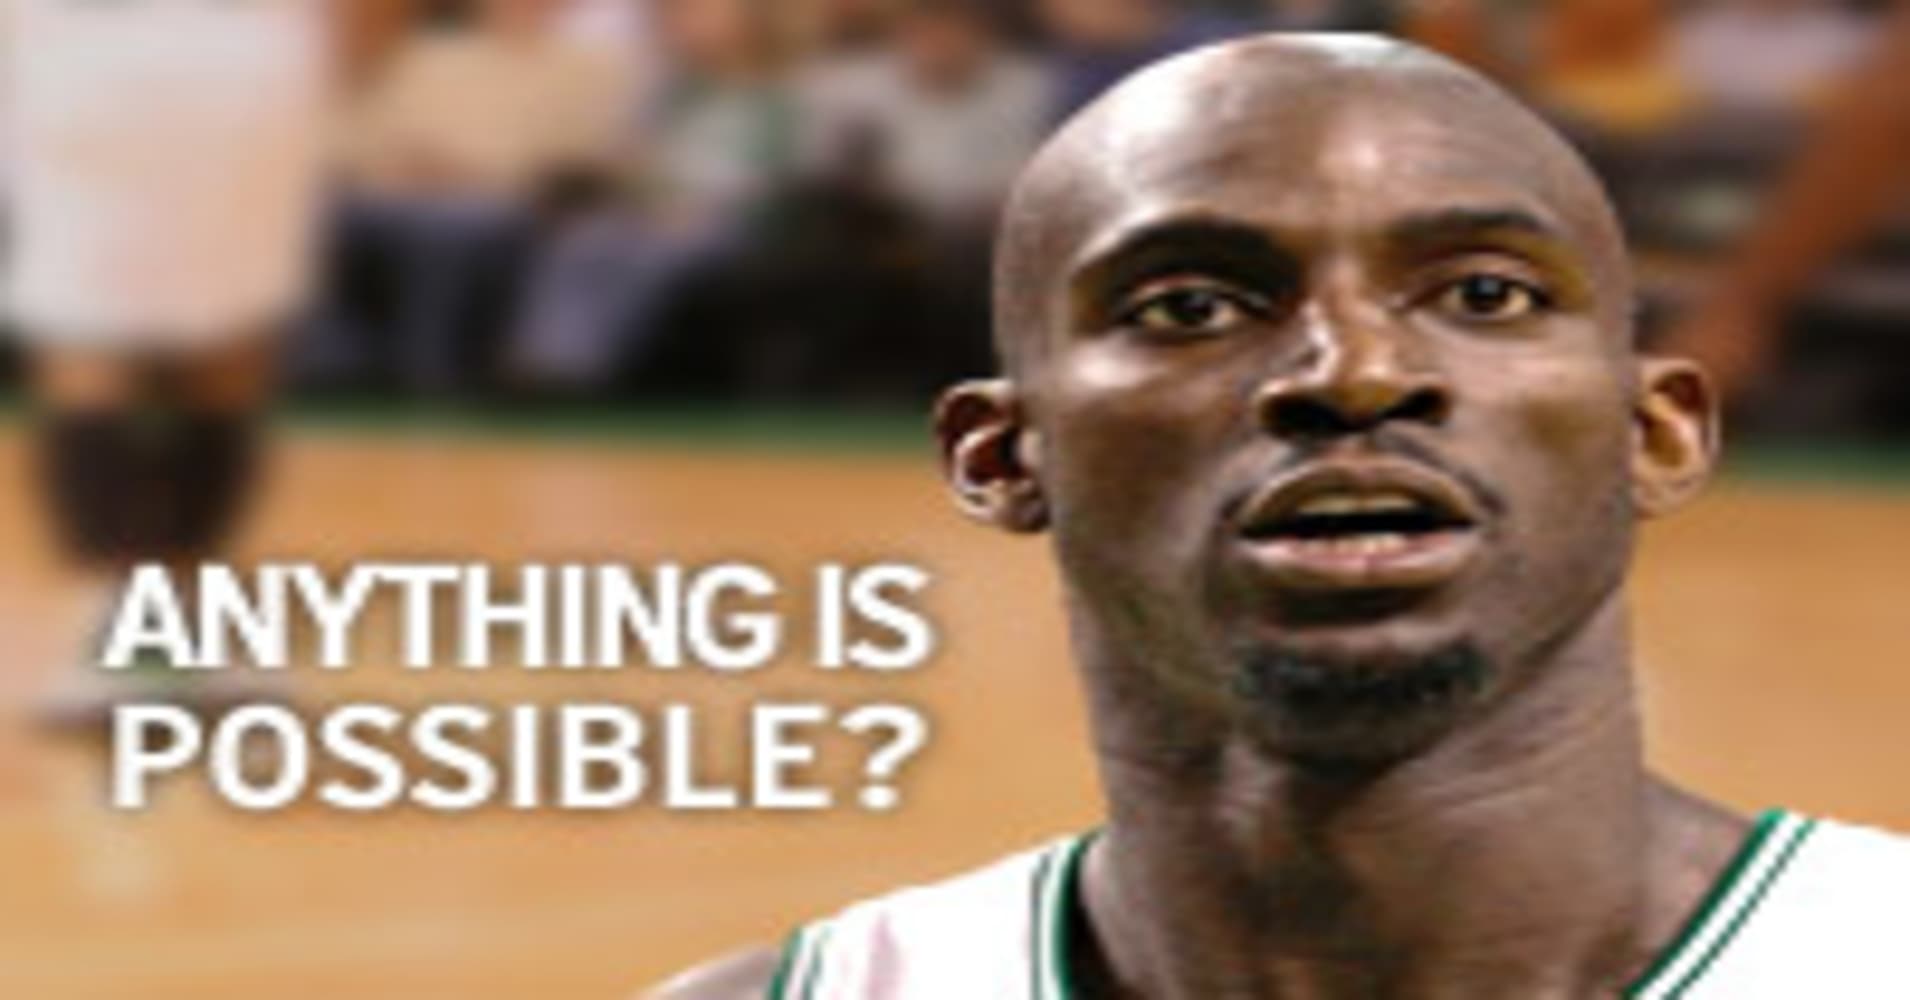 kevin garnett anything is possible